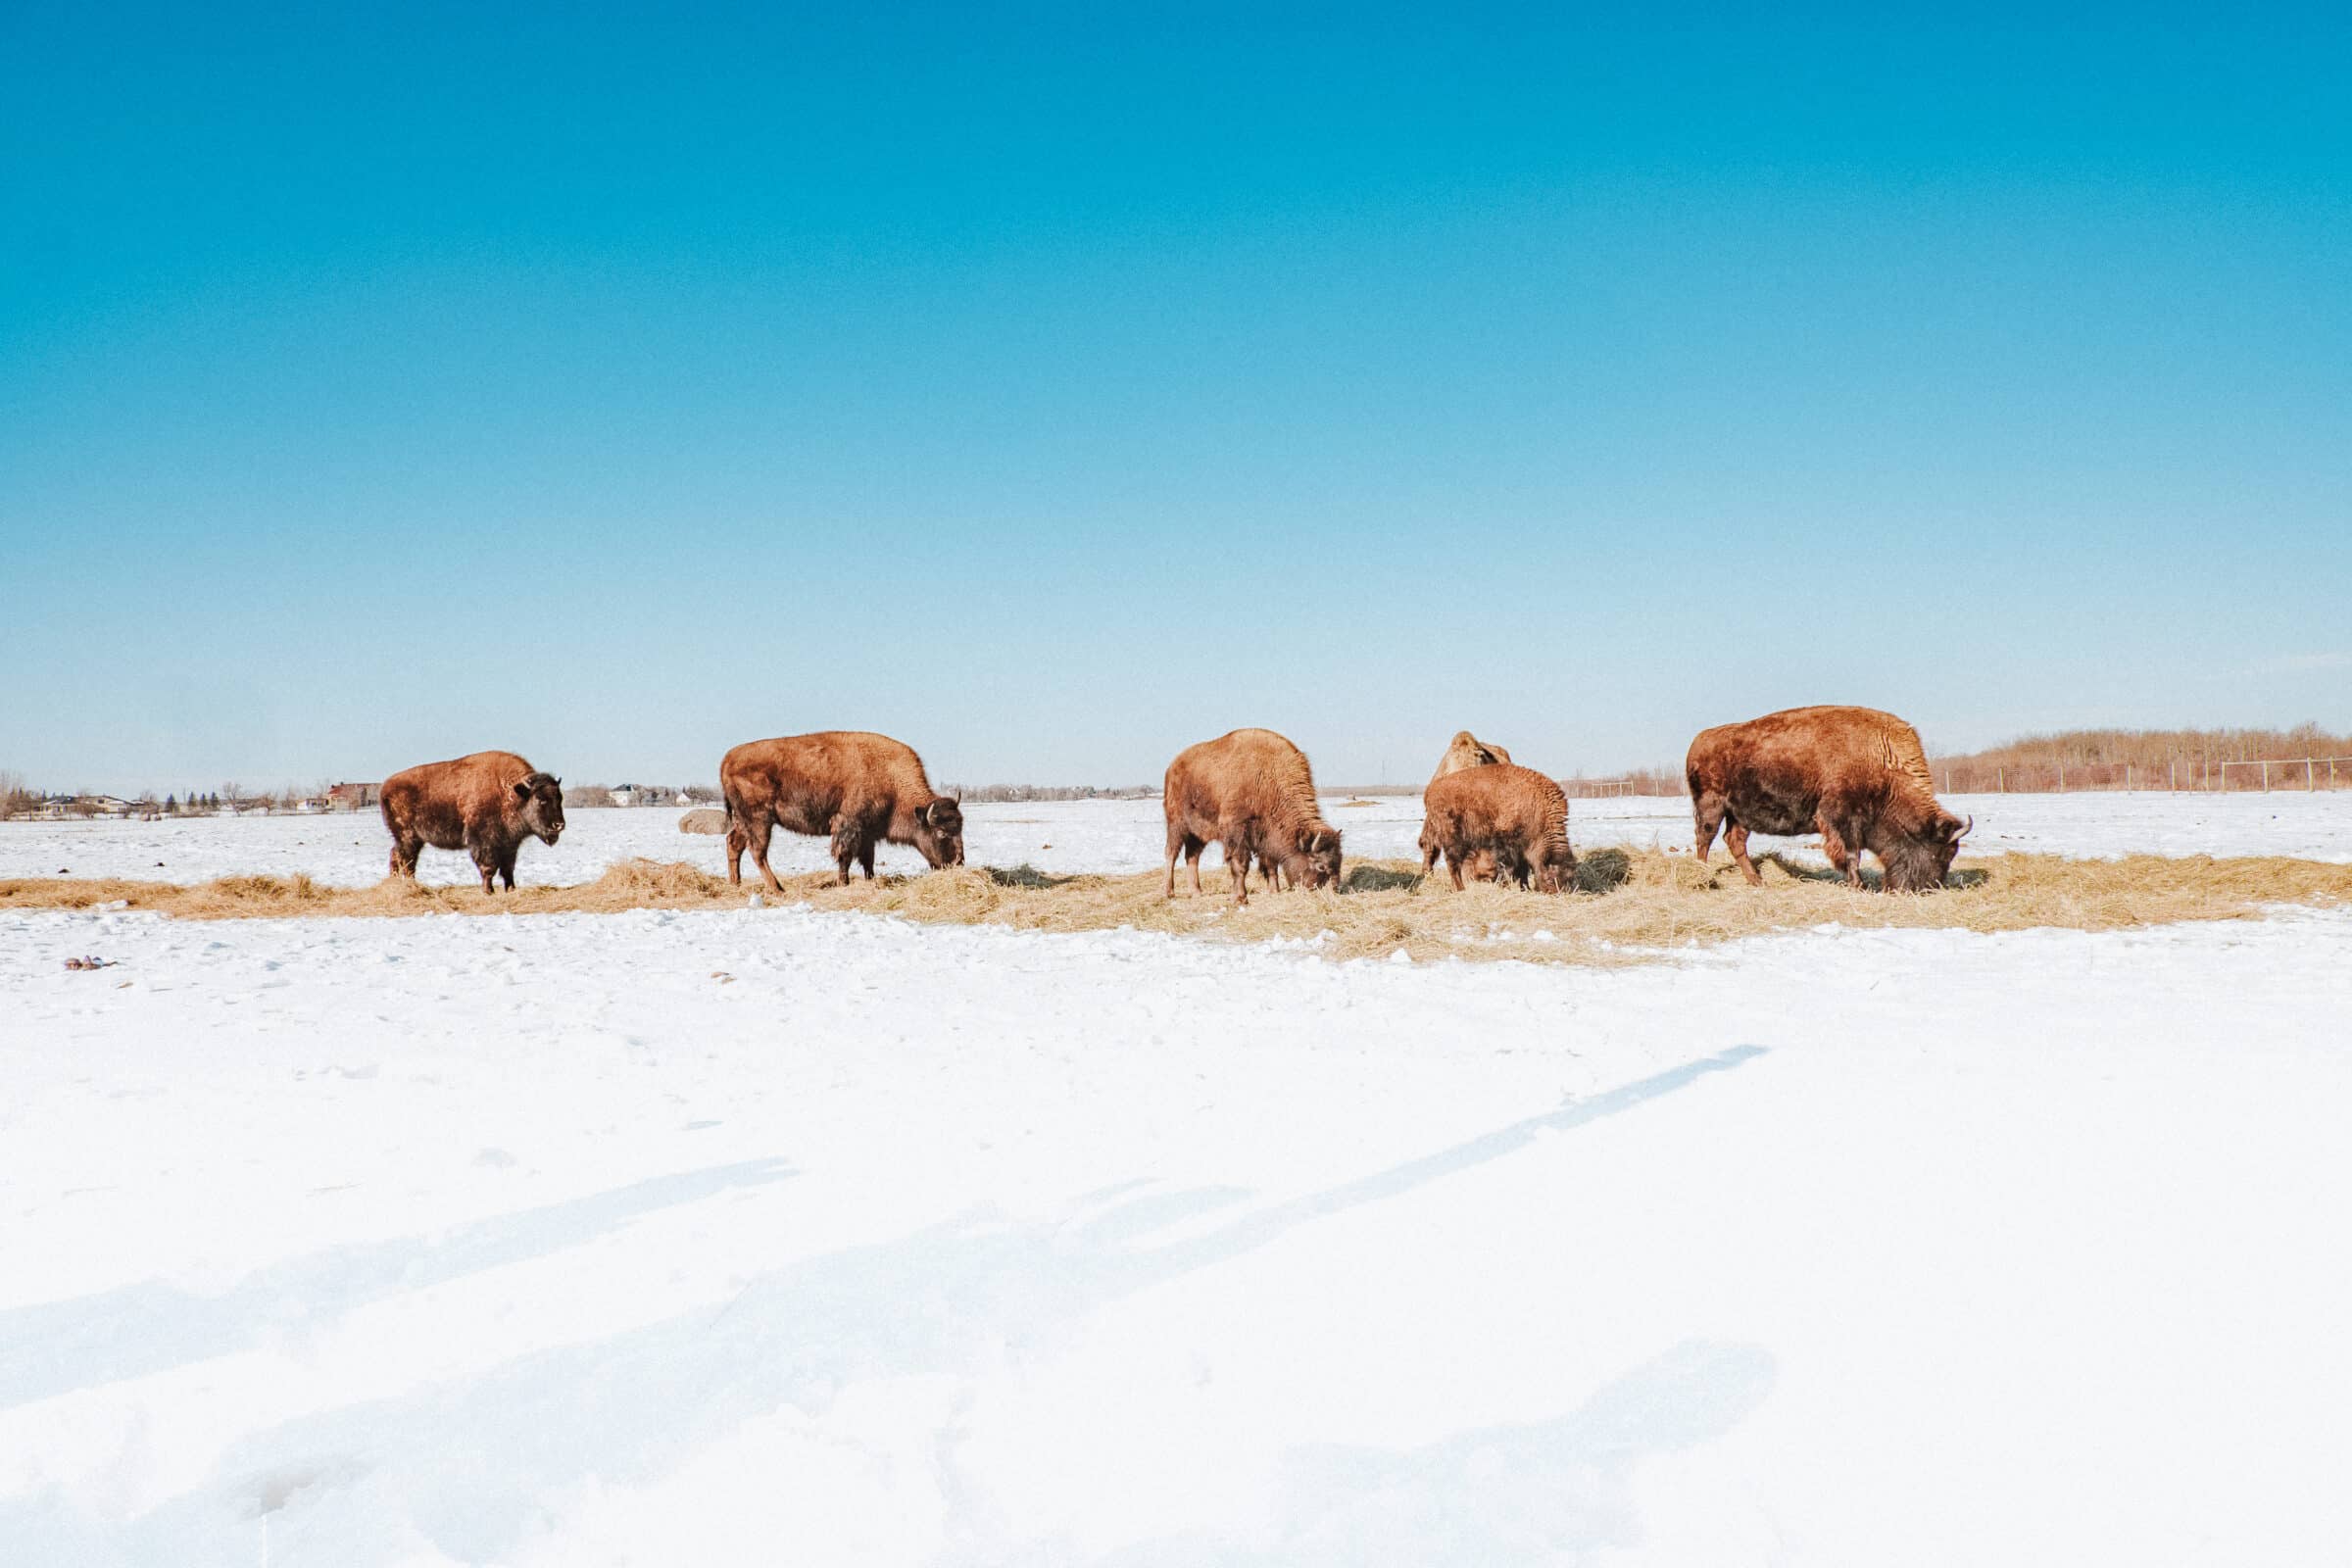 5 bison stand in field in winter eating hay